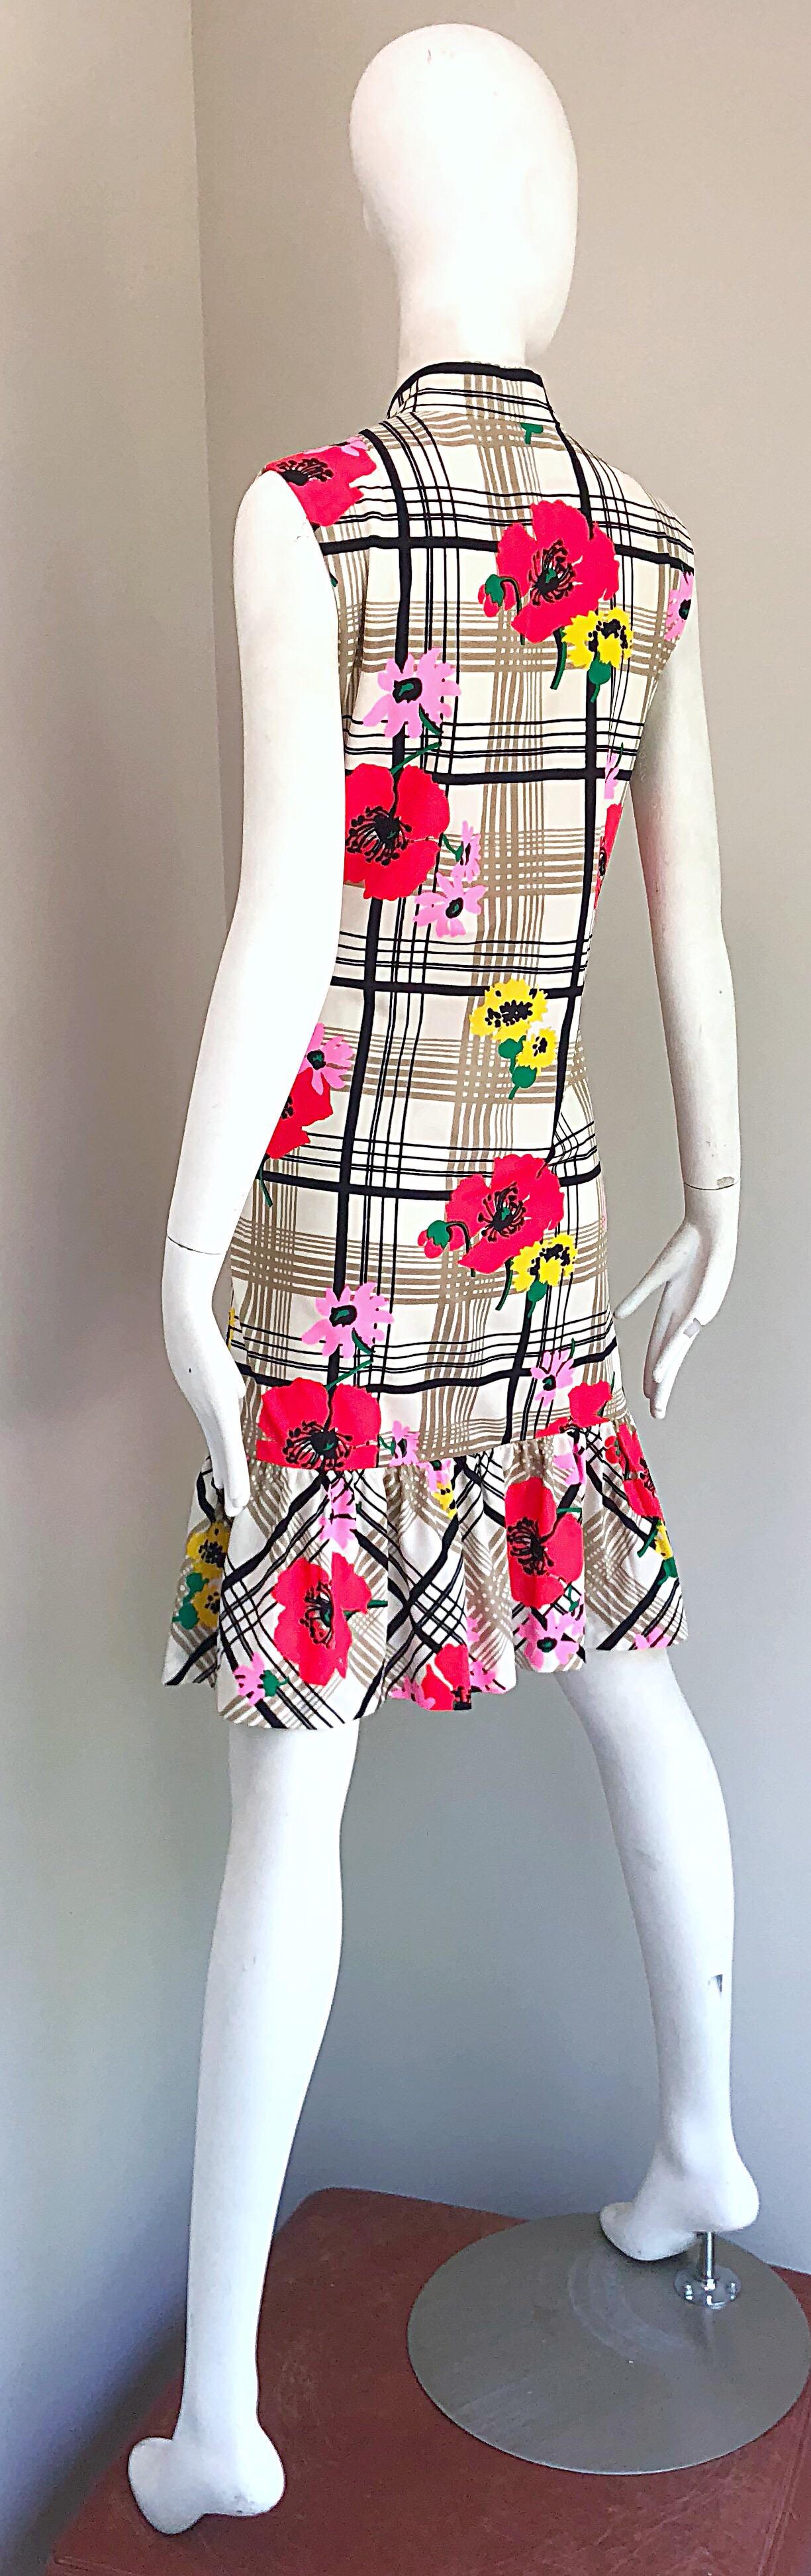 Chic 1960s Stripes and Flowers Black and White Colorful Vintage 60s Shift Dress 5